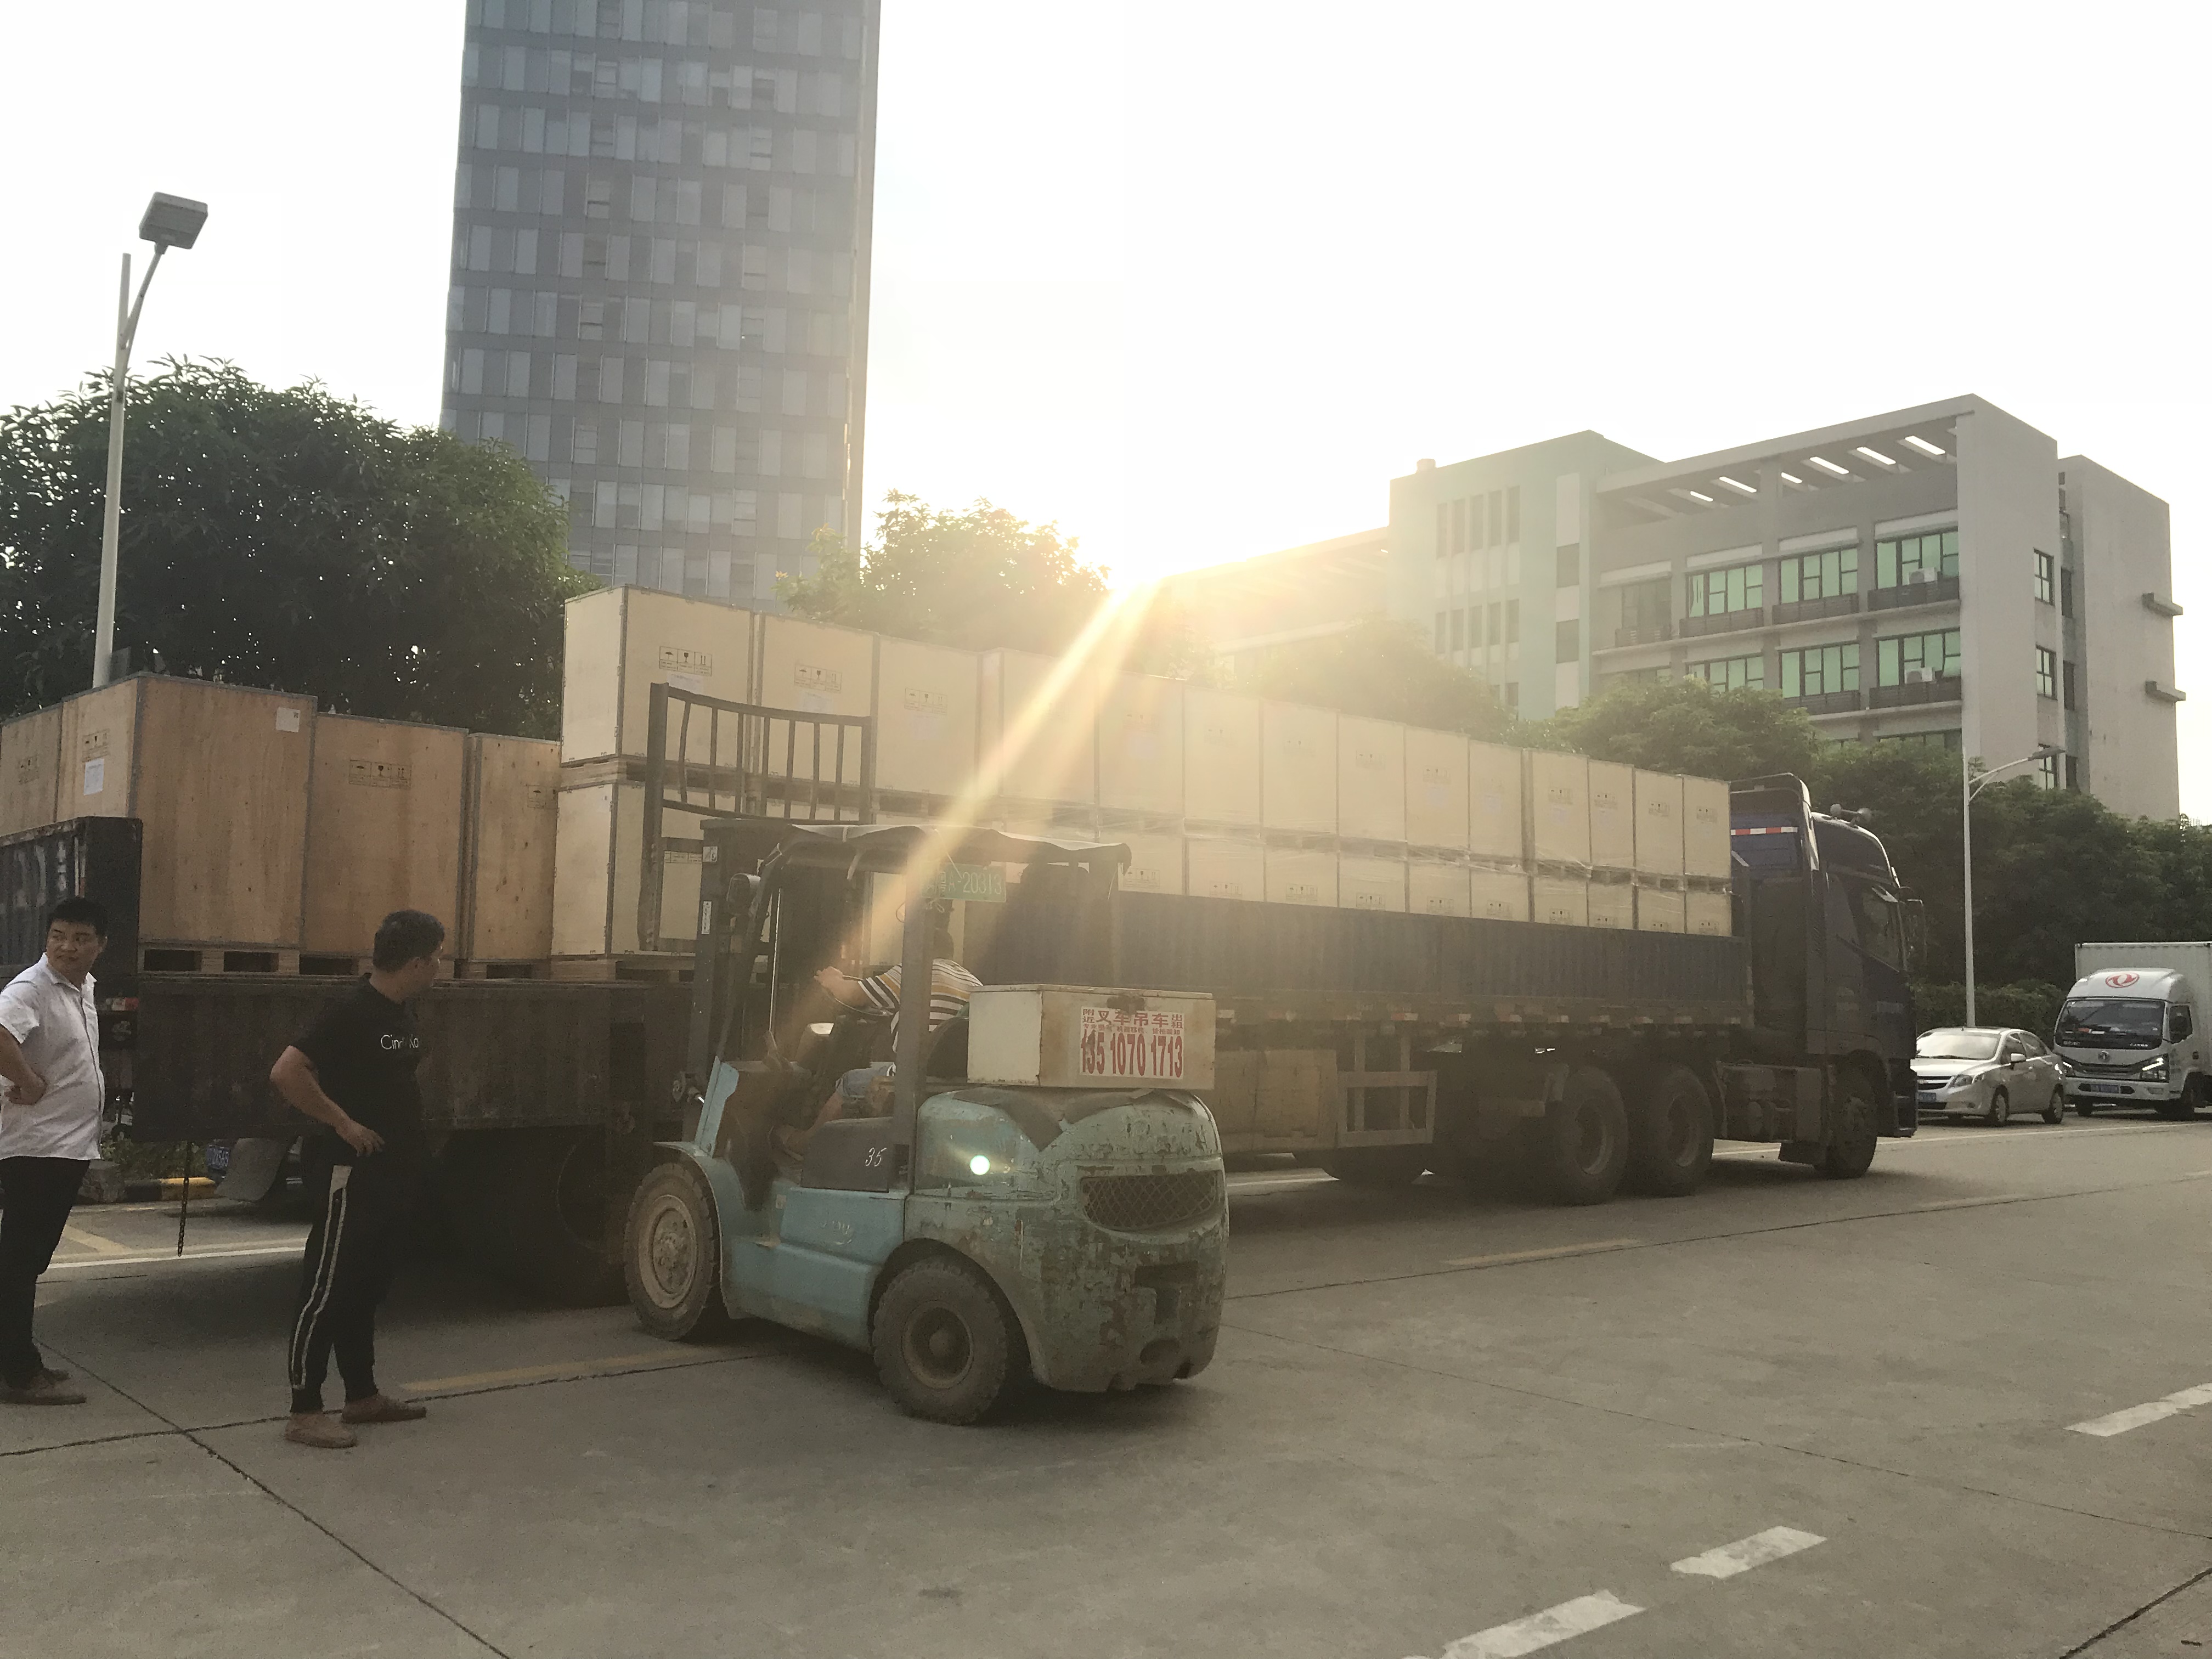 Guangzhou Efficient Technology Co., Ltd.delivered nearly 200 sets of high-power intelligent chargers to customers on time